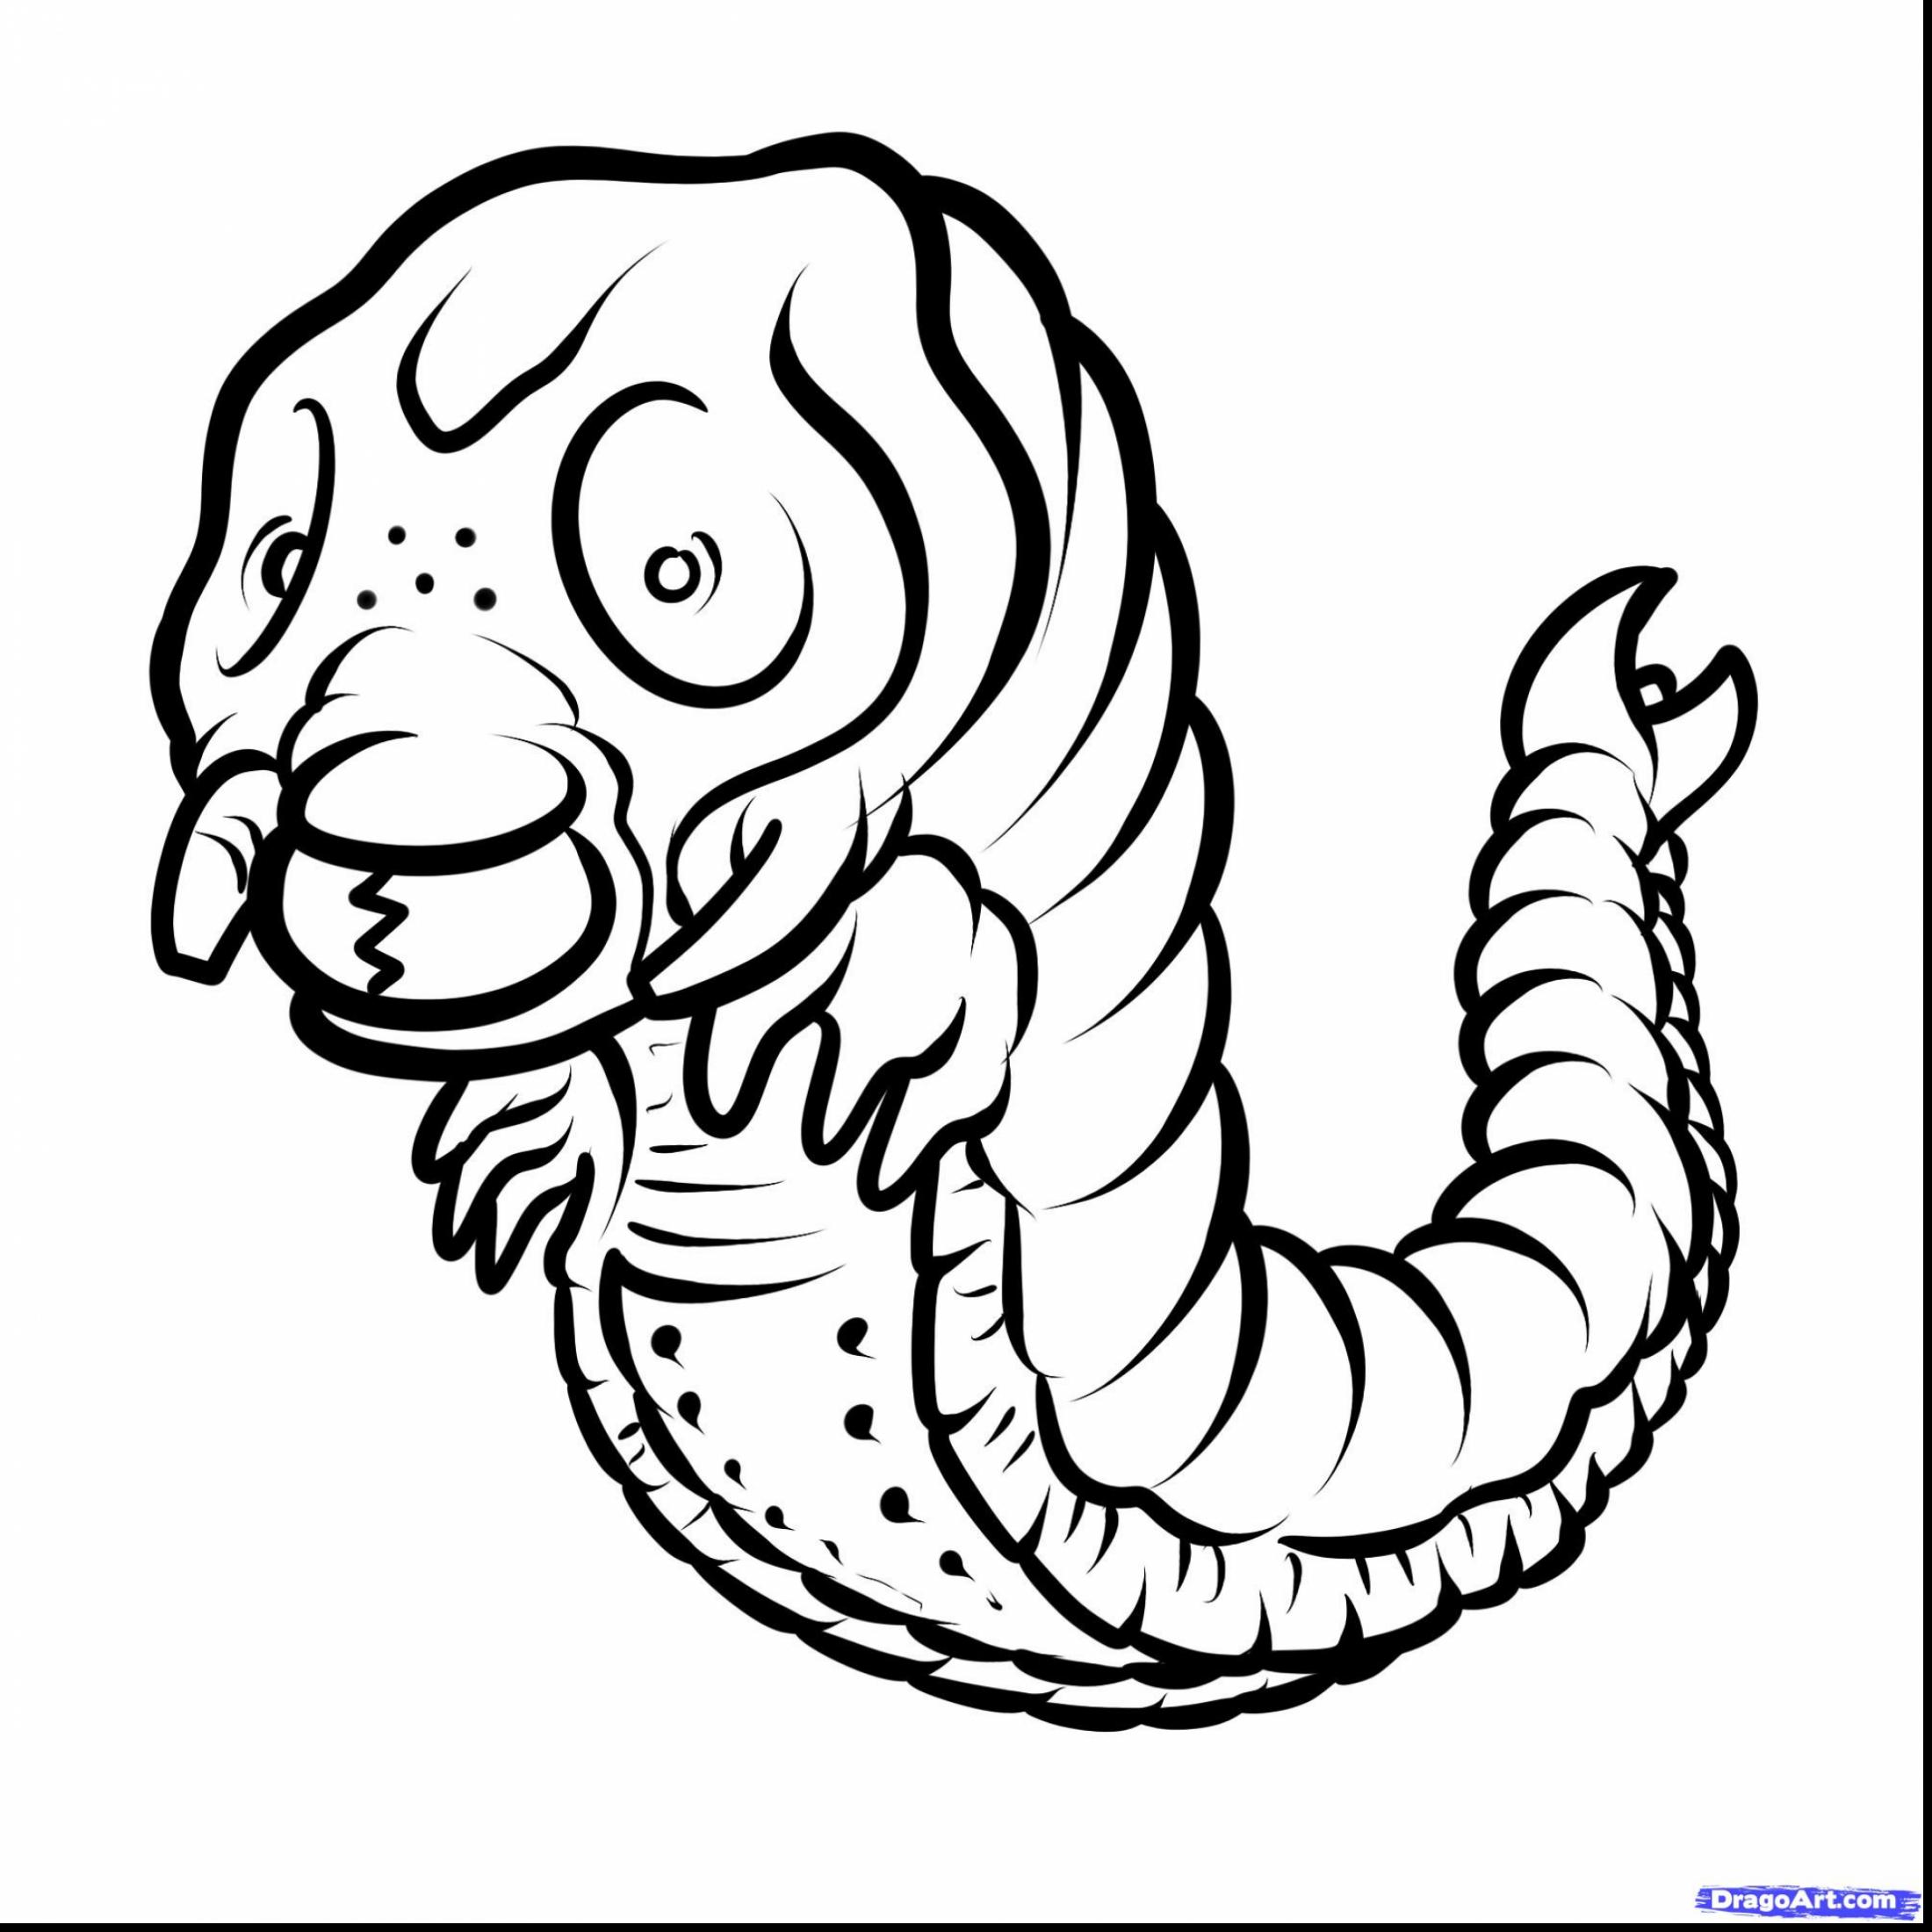 Coloring And Drawing: Larva Cartoon Coloring Pages - Coloring Home